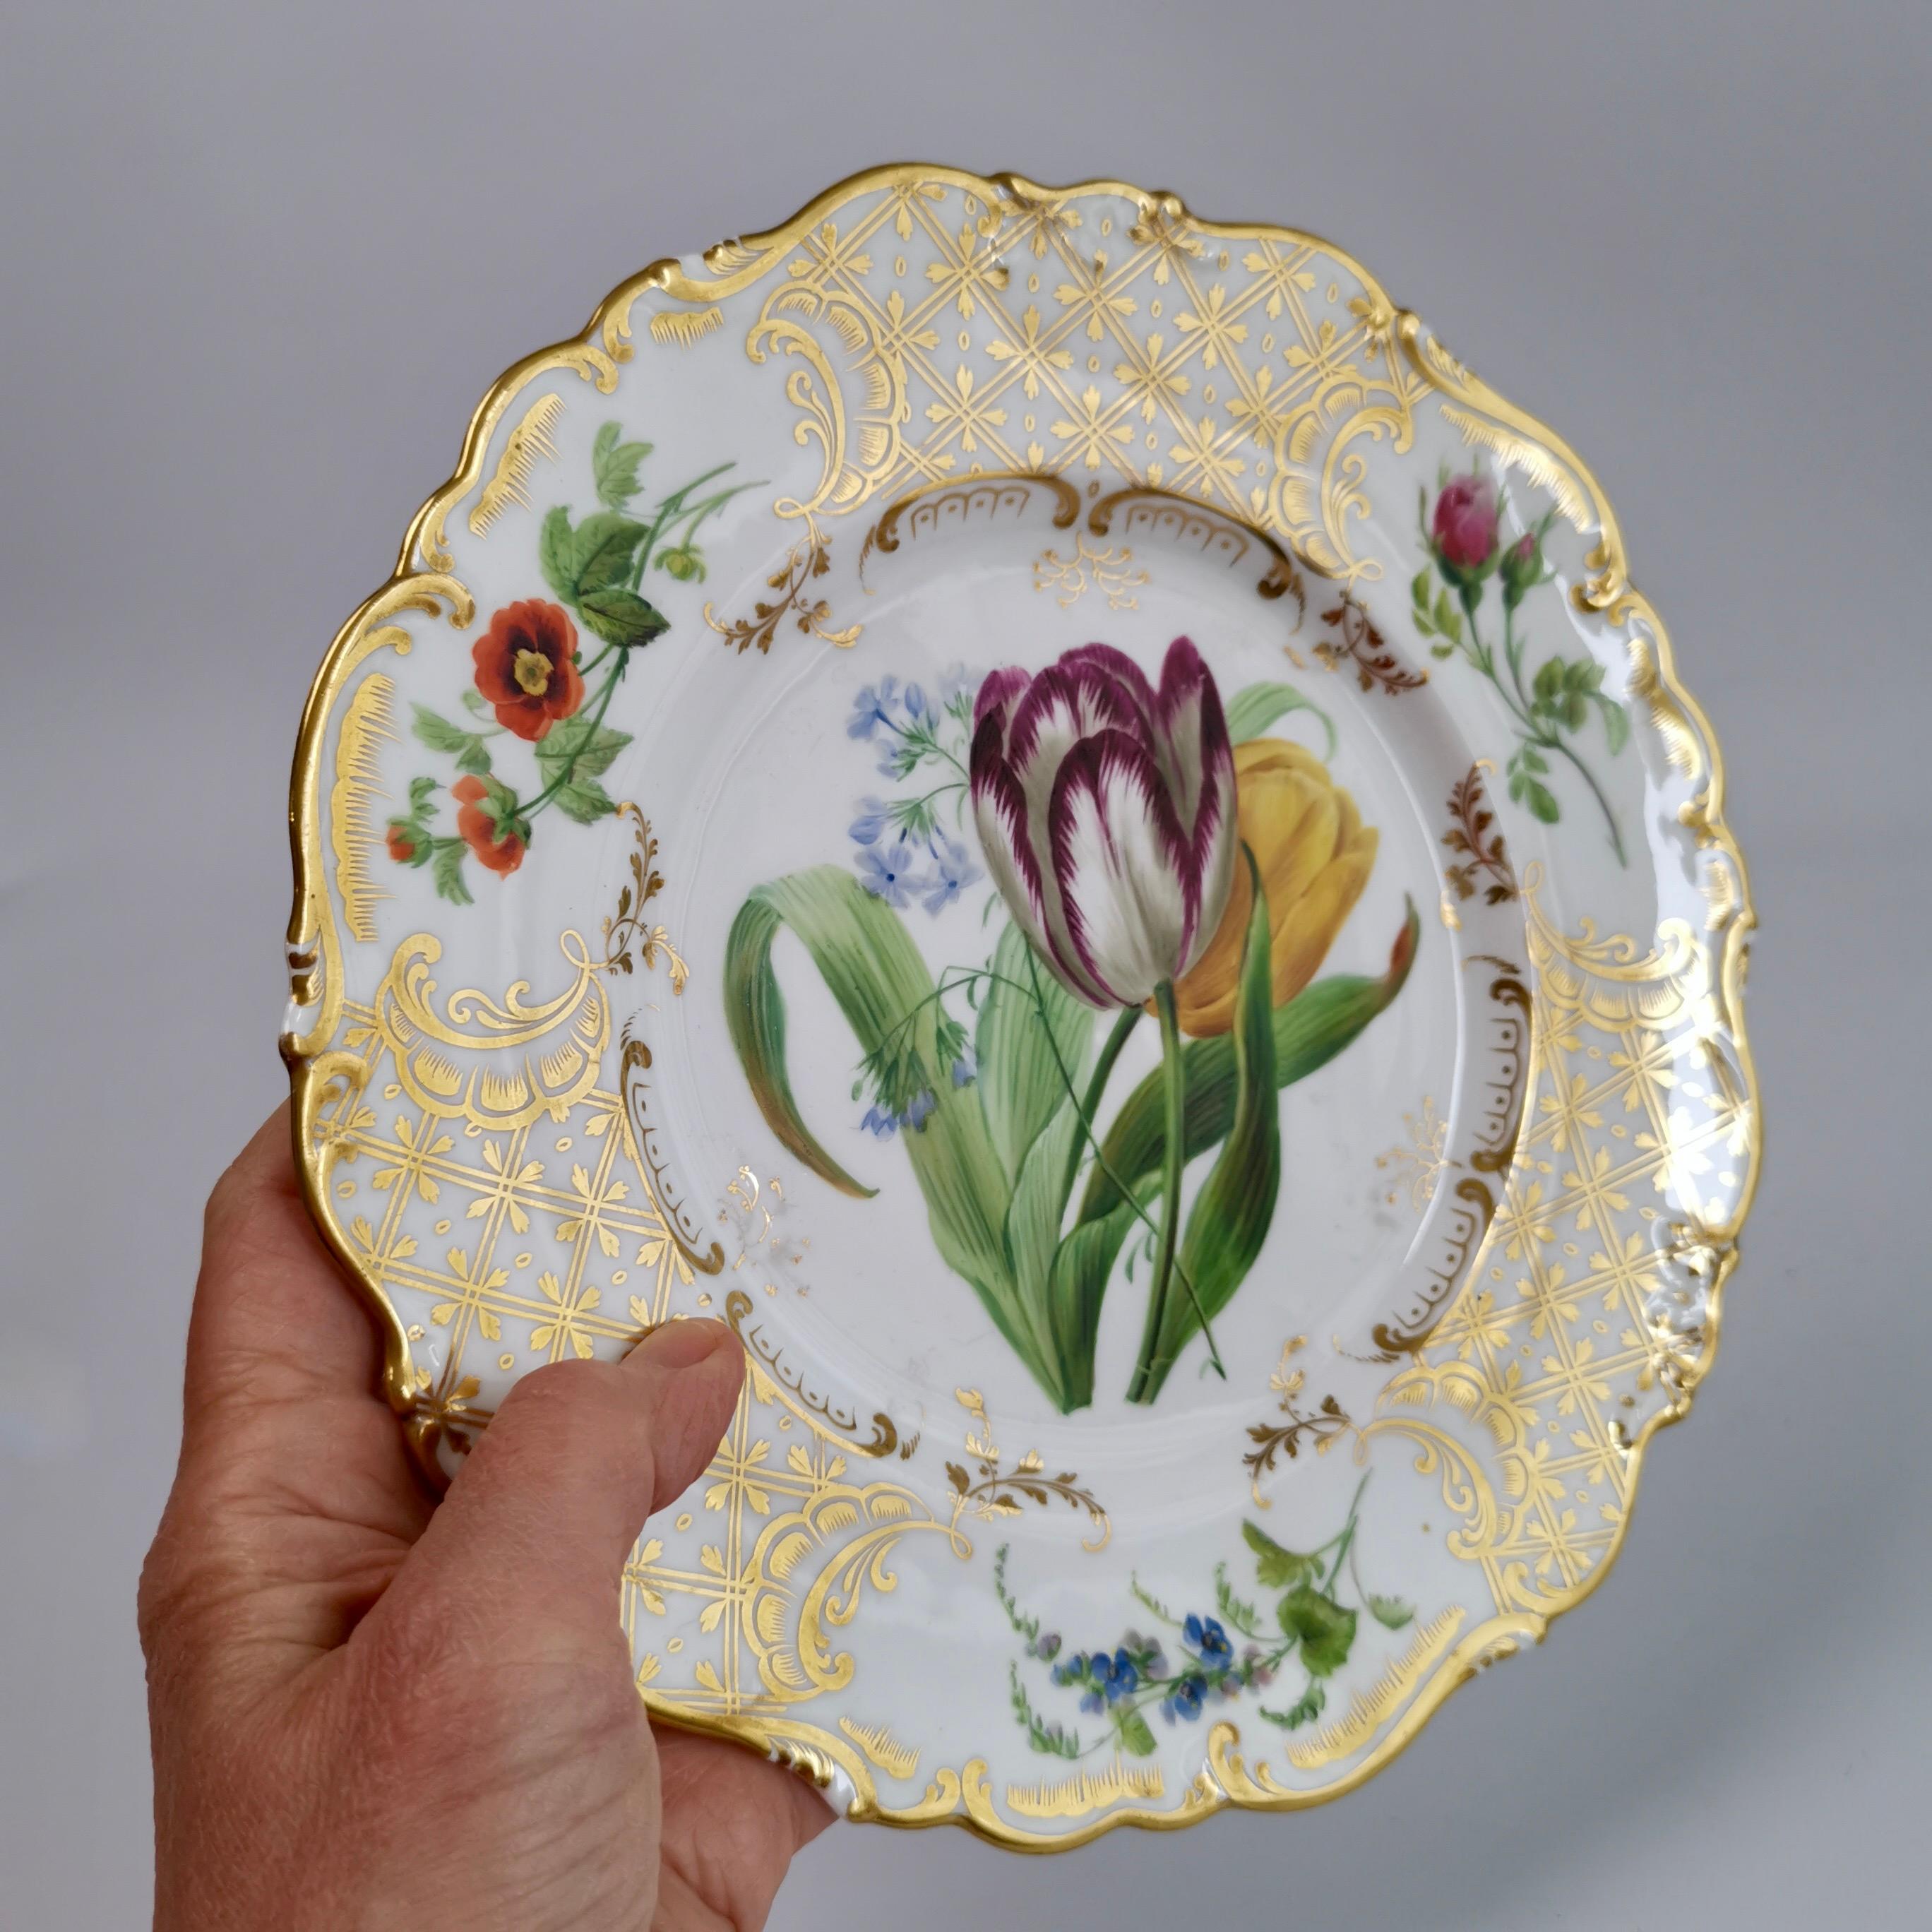 This is a stunning dessert plate made by Ridgway some time between 1845 and 1850. It would have belonged to a large dessert service. The plate is beautifully shaped and has a rich decoration of lavish gilt and stunning hand painted flowers.

I